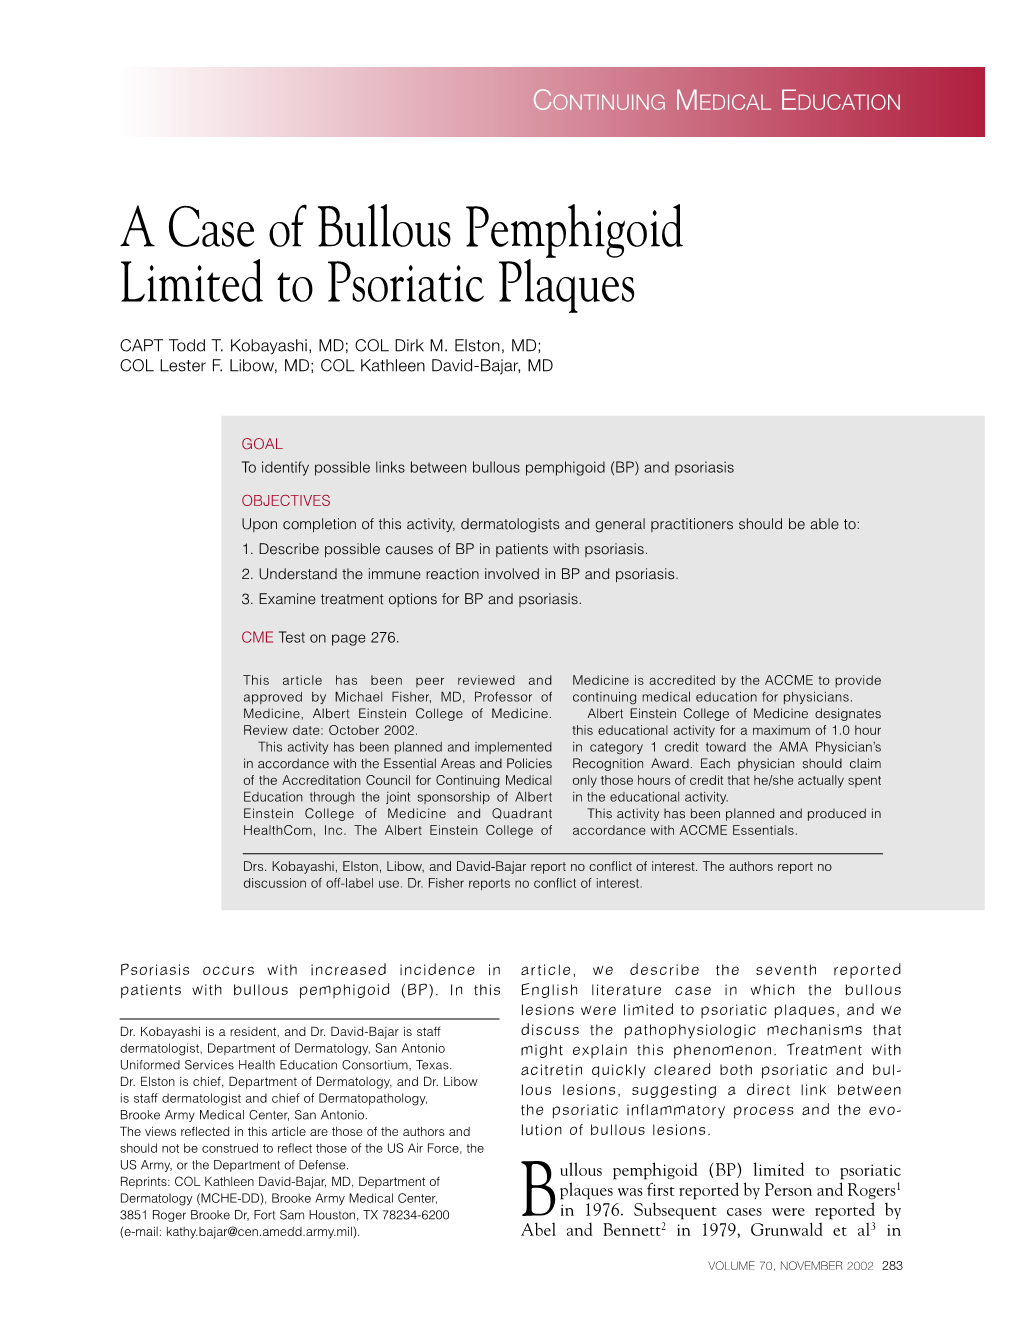 A Case of Bullous Pemphigoid Limited to Psoriatic Plaques